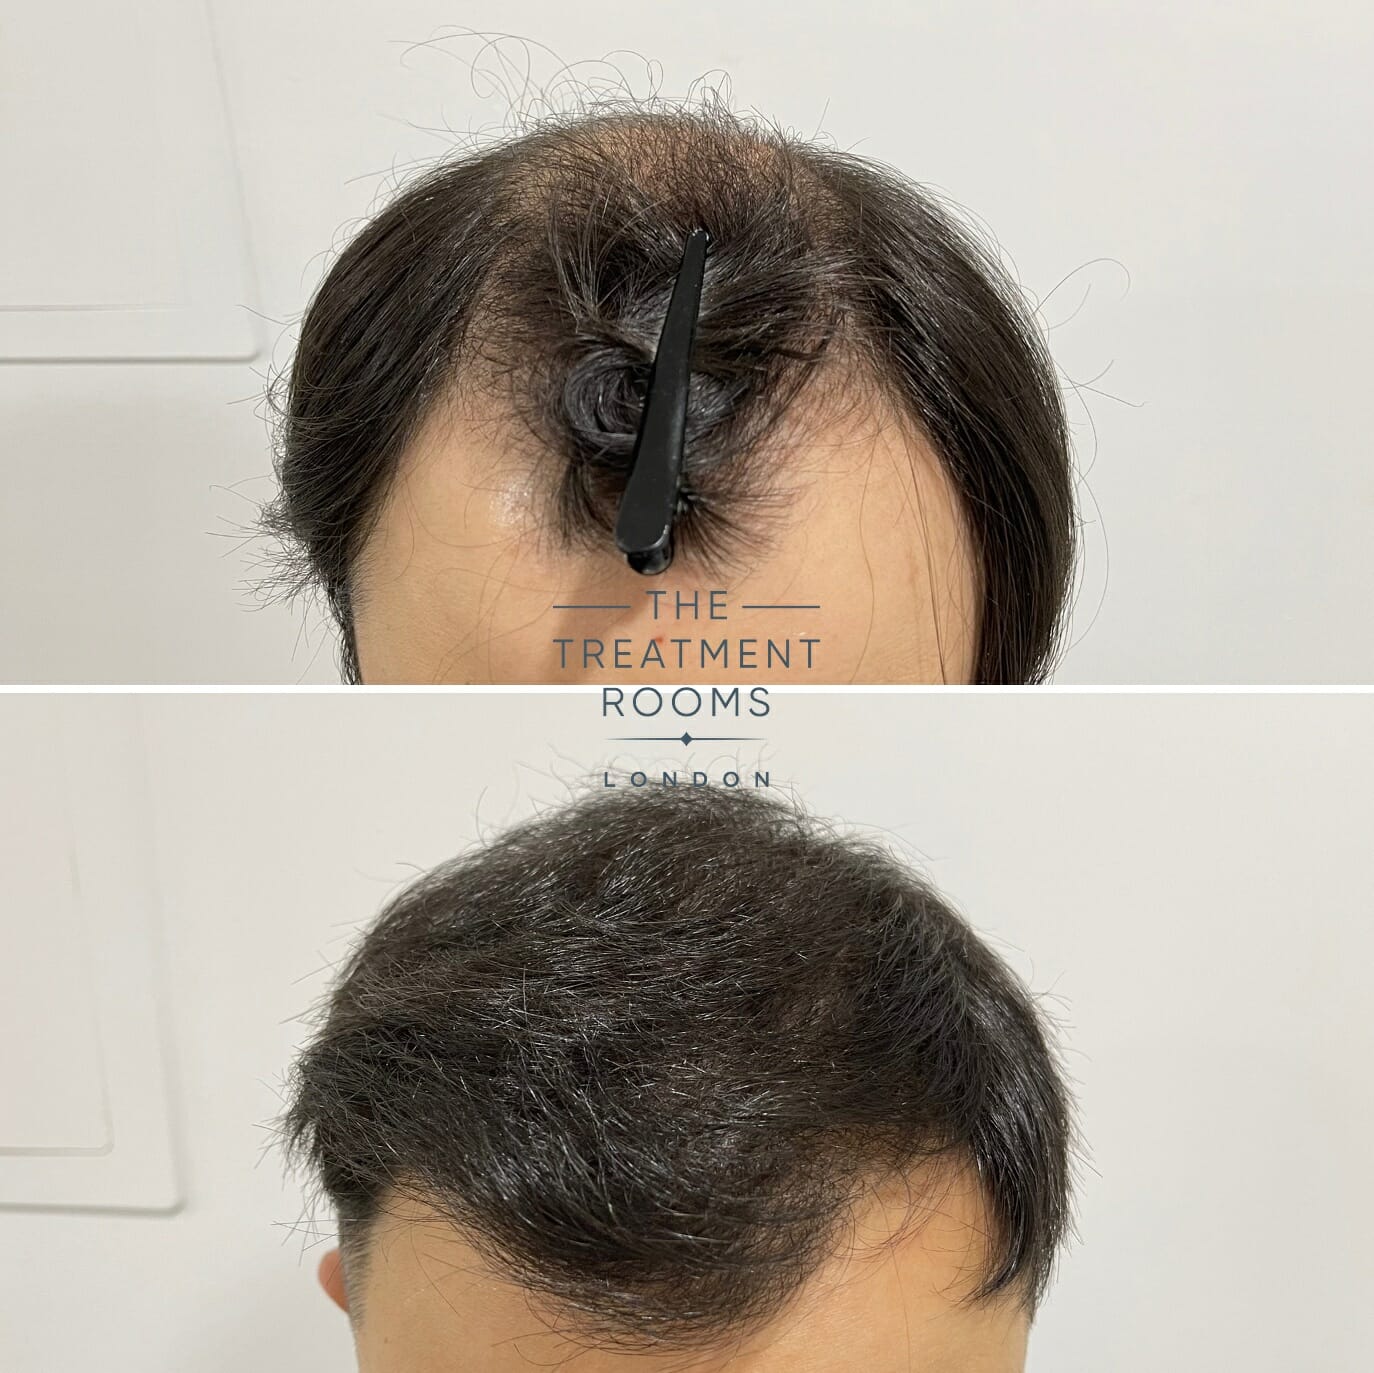 Crown and hairline hair transplant before and after